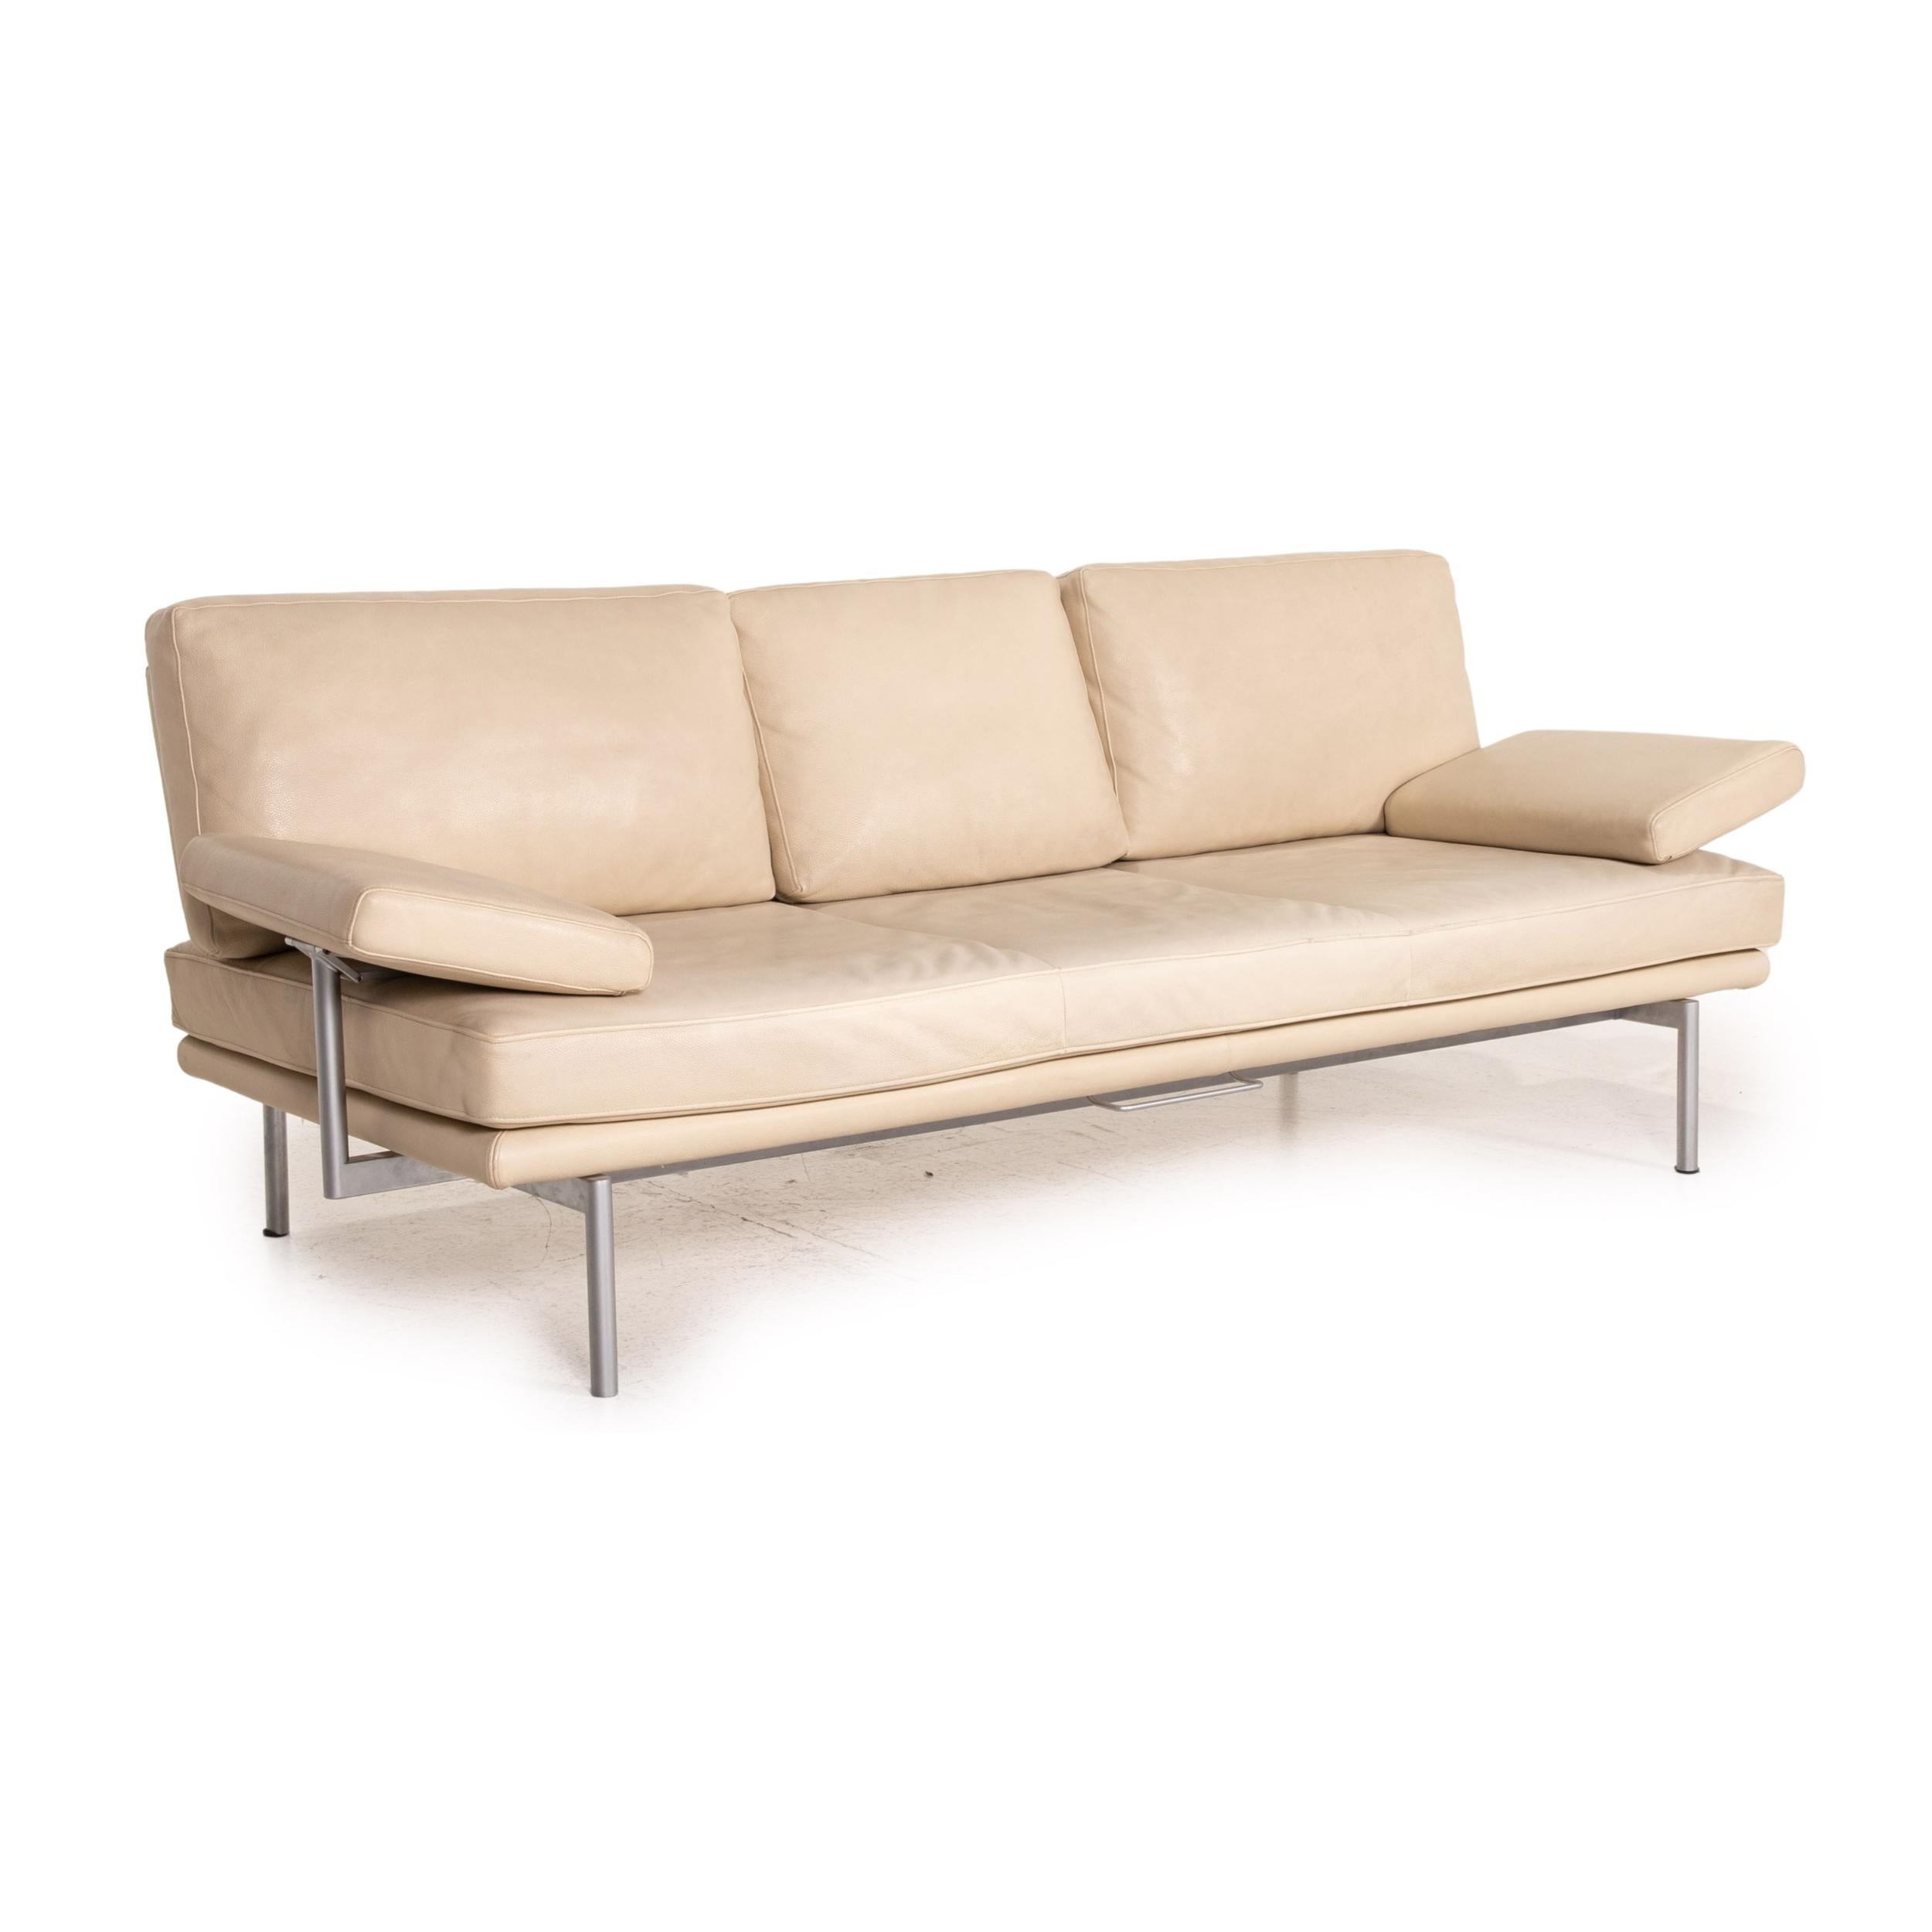 Contemporary Walter Knoll Living Platform Leather Sofa Beige Three-Seater Function Coucg